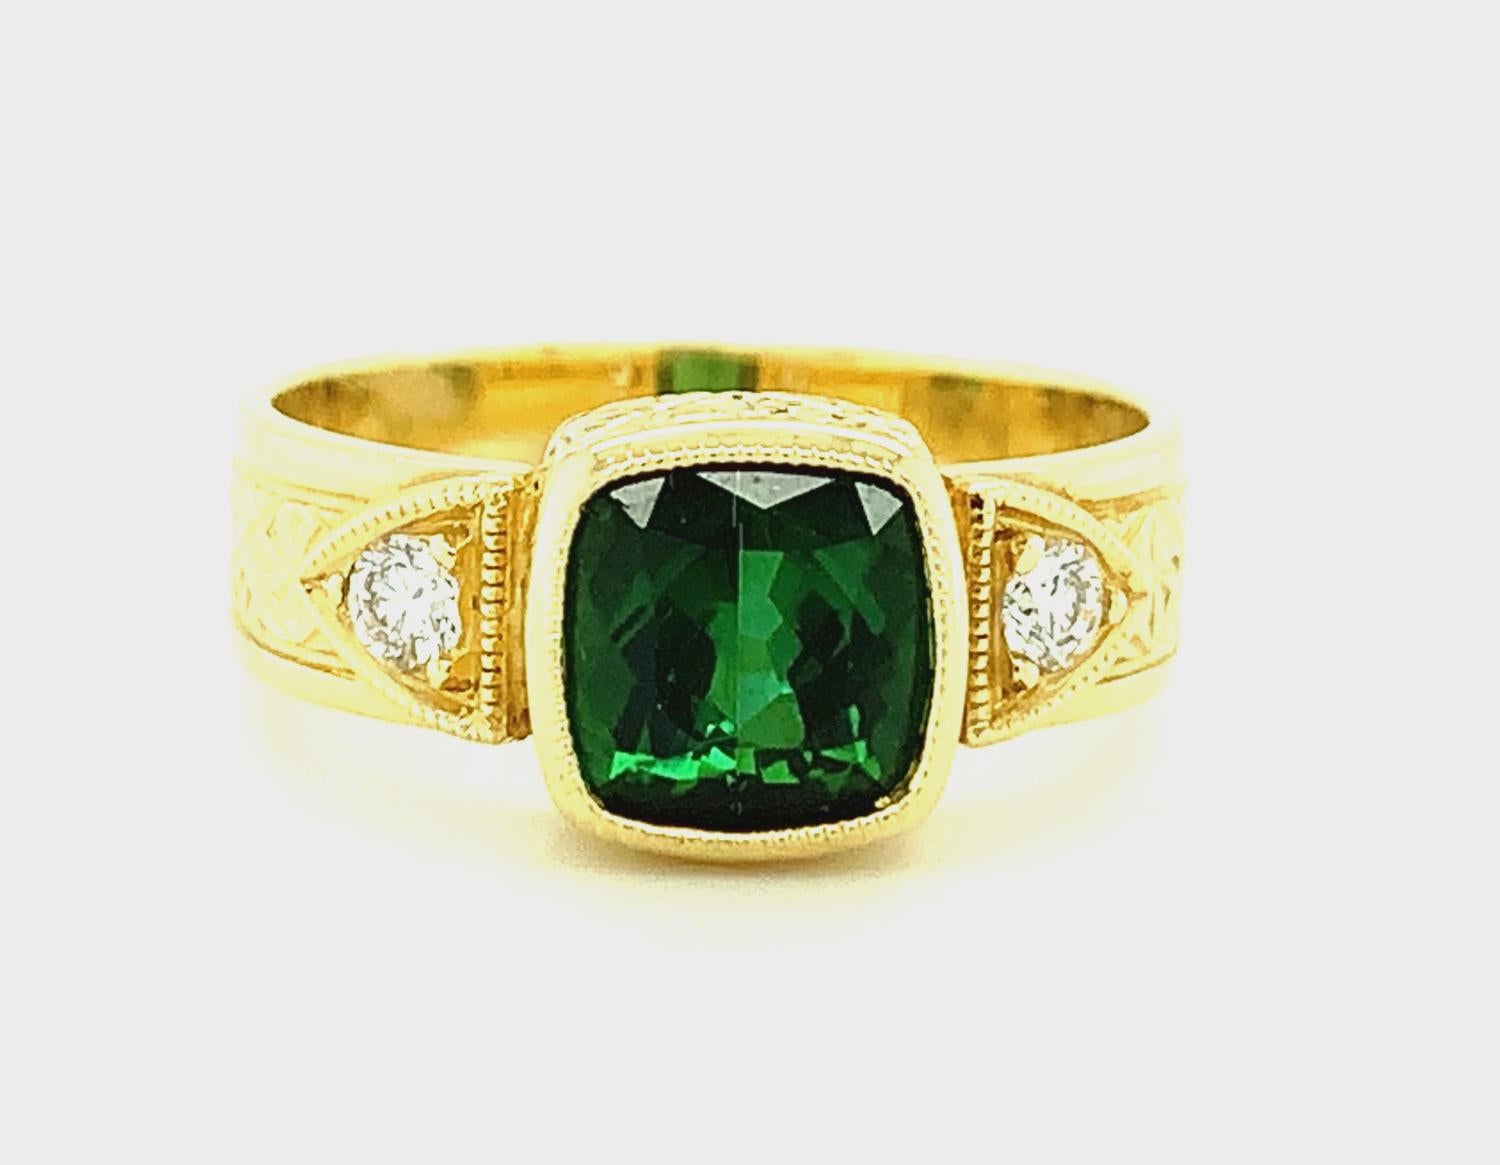 This beautiful ring features a richly colored, 1.58 carat chrome green tourmaline that has been set in a handmade 18k yellow gold bezel. The cushion-shaped gemstone has striking deep, emerald green color and is accented by two sparkling, round